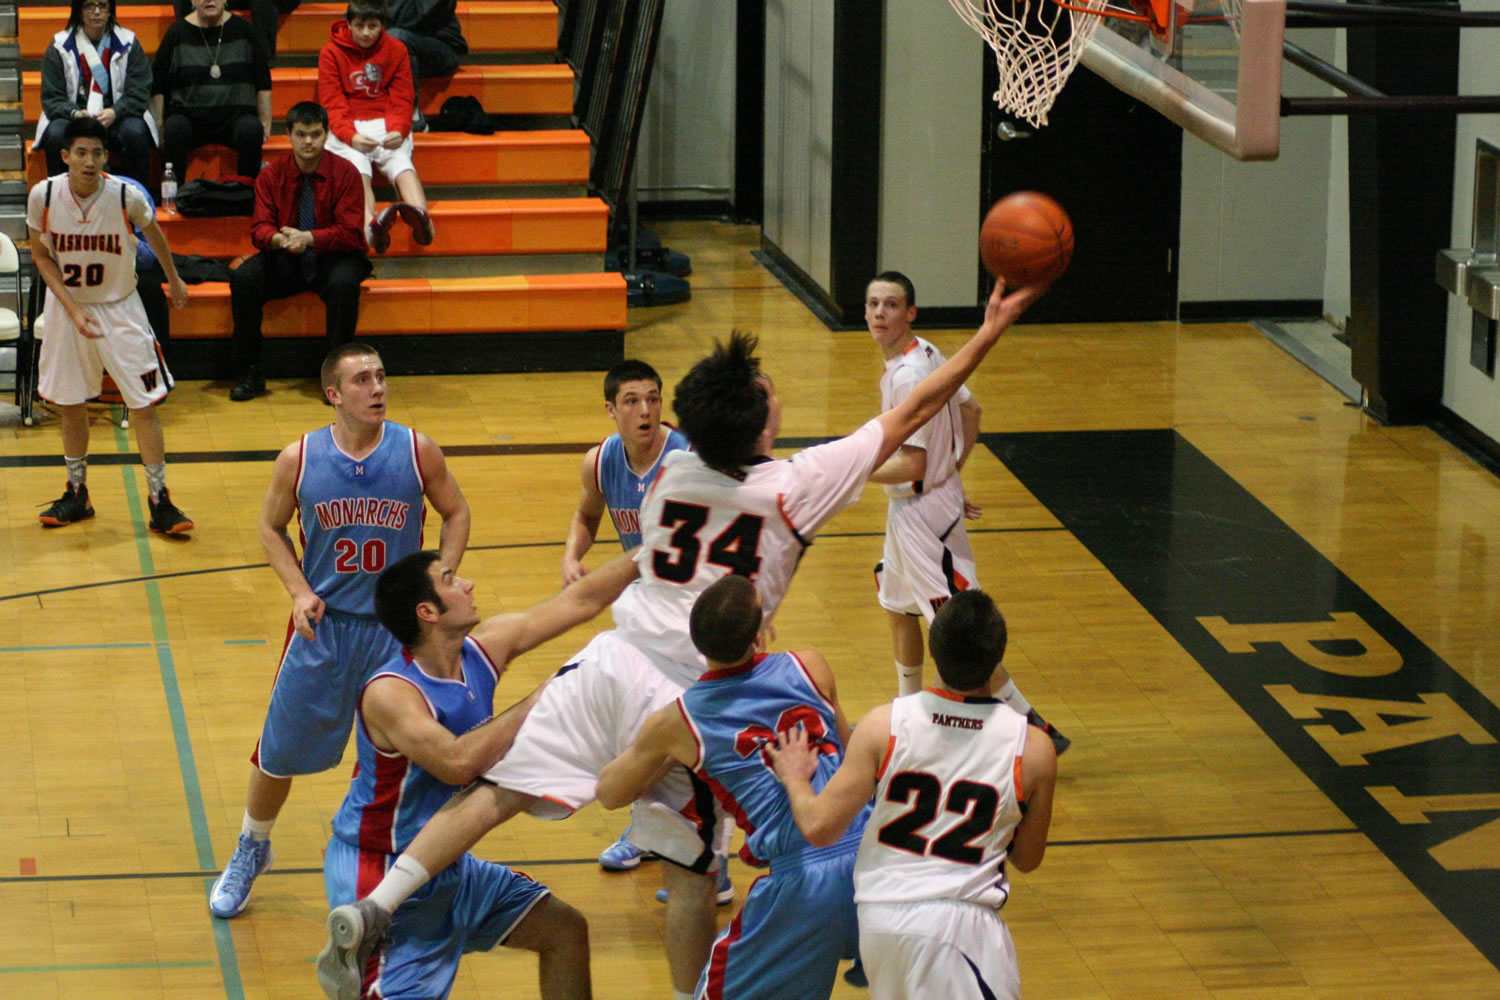 Washougal High School senior Aaron Deister splits the defense and scores a basket Thursday, at WHS. The Panthers defeated the Monarchs 66-58.